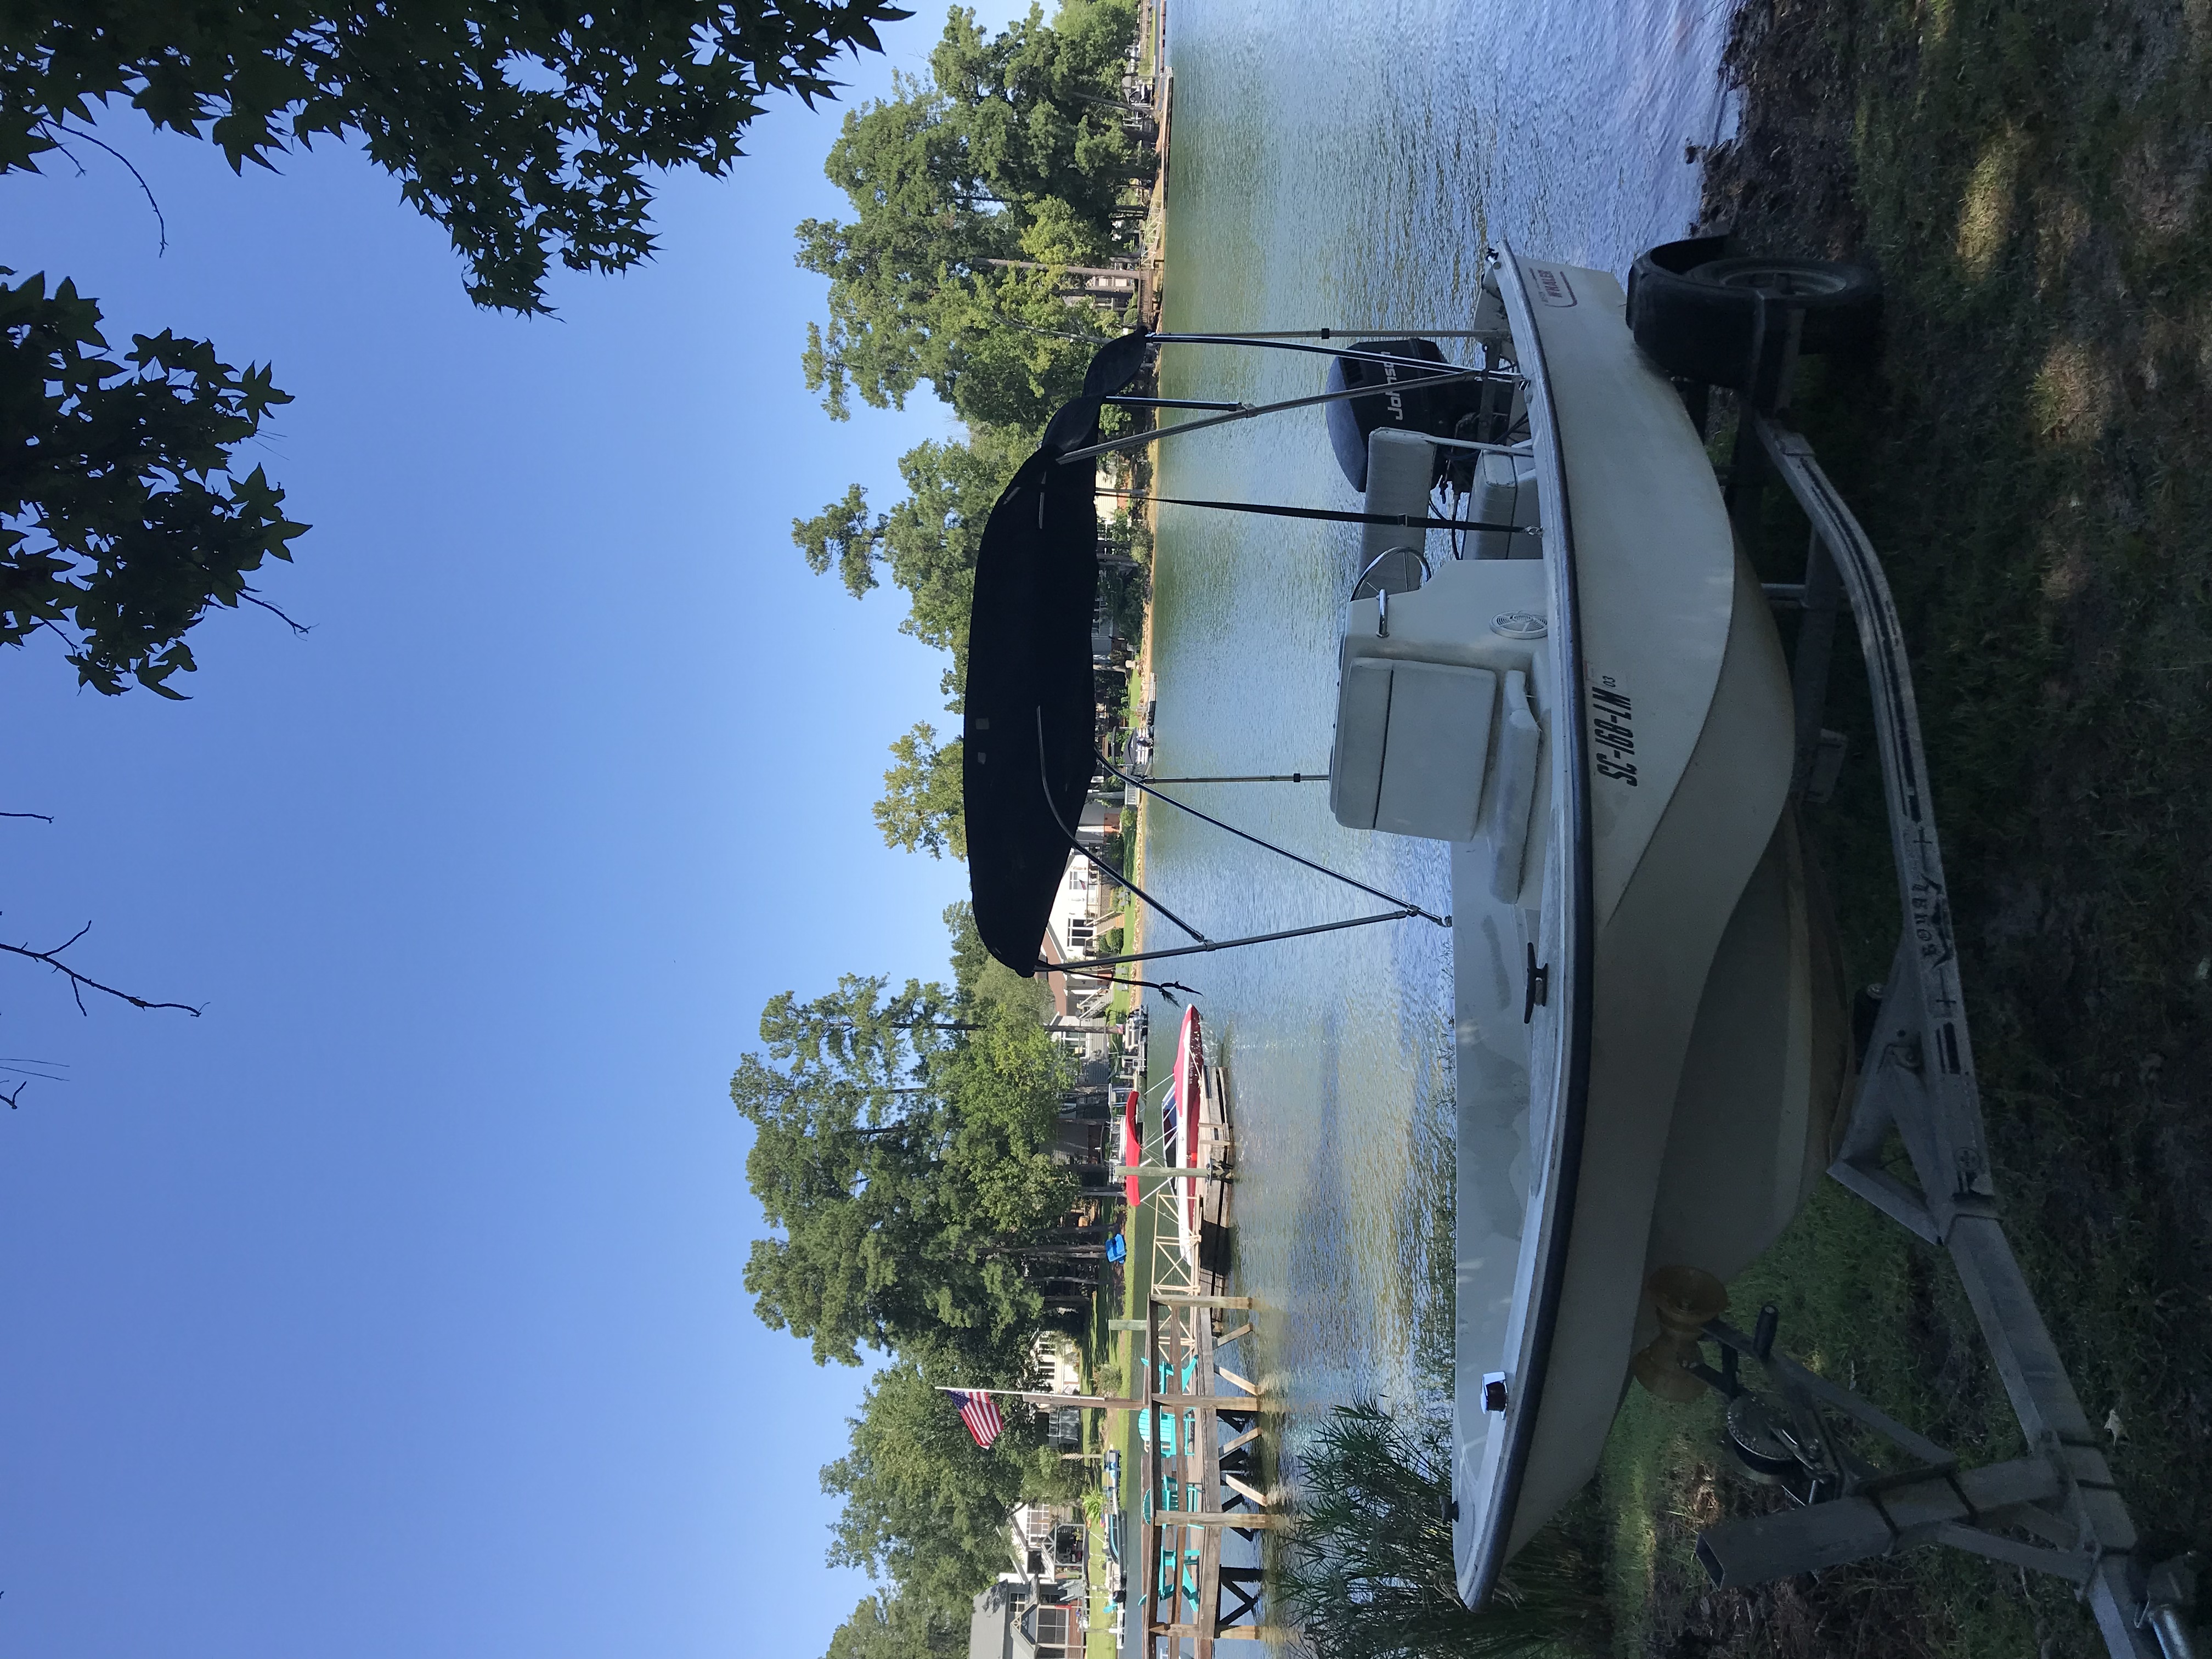 1977 17 foot Boston Whaler Newport Power boat for sale in Chapin, SC - image 3 